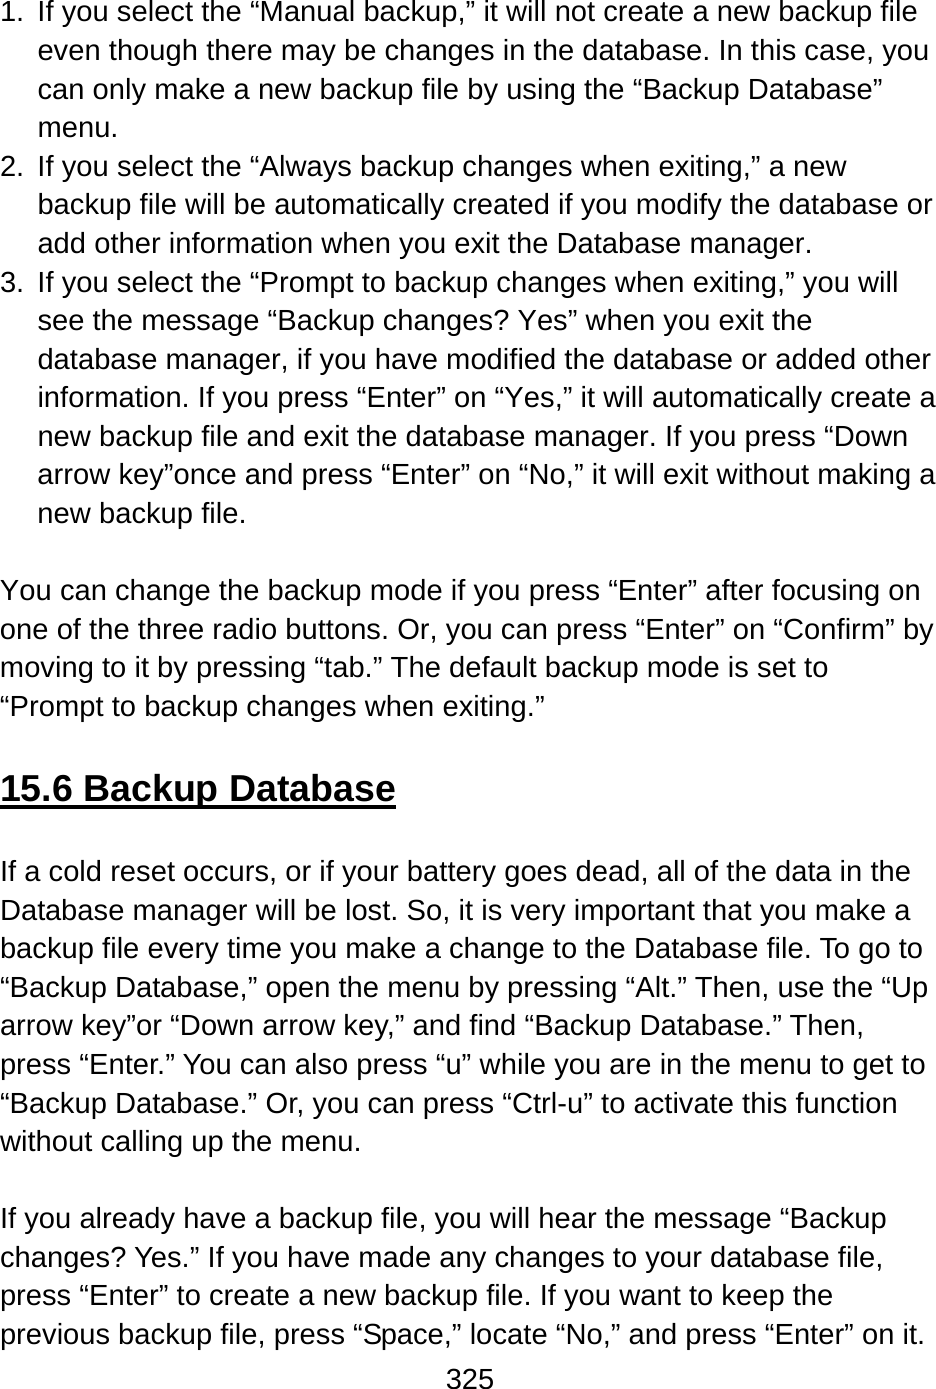 325   1.  If you select the “Manual backup,” it will not create a new backup file even though there may be changes in the database. In this case, you can only make a new backup file by using the “Backup Database” menu. 2.  If you select the “Always backup changes when exiting,” a new backup file will be automatically created if you modify the database or add other information when you exit the Database manager. 3.  If you select the “Prompt to backup changes when exiting,” you will see the message “Backup changes? Yes” when you exit the database manager, if you have modified the database or added other information. If you press “Enter” on “Yes,” it will automatically create a new backup file and exit the database manager. If you press “Down arrow key”once and press “Enter” on “No,” it will exit without making a new backup file.  You can change the backup mode if you press “Enter” after focusing on one of the three radio buttons. Or, you can press “Enter” on “Confirm” by moving to it by pressing “tab.” The default backup mode is set to “Prompt to backup changes when exiting.”  15.6 Backup Database  If a cold reset occurs, or if your battery goes dead, all of the data in the Database manager will be lost. So, it is very important that you make a backup file every time you make a change to the Database file. To go to “Backup Database,” open the menu by pressing “Alt.” Then, use the “Up arrow key”or “Down arrow key,” and find “Backup Database.” Then, press “Enter.” You can also press “u” while you are in the menu to get to “Backup Database.” Or, you can press “Ctrl-u” to activate this function without calling up the menu.  If you already have a backup file, you will hear the message “Backup changes? Yes.” If you have made any changes to your database file, press “Enter” to create a new backup file. If you want to keep the previous backup file, press “Space,” locate “No,” and press “Enter” on it.   